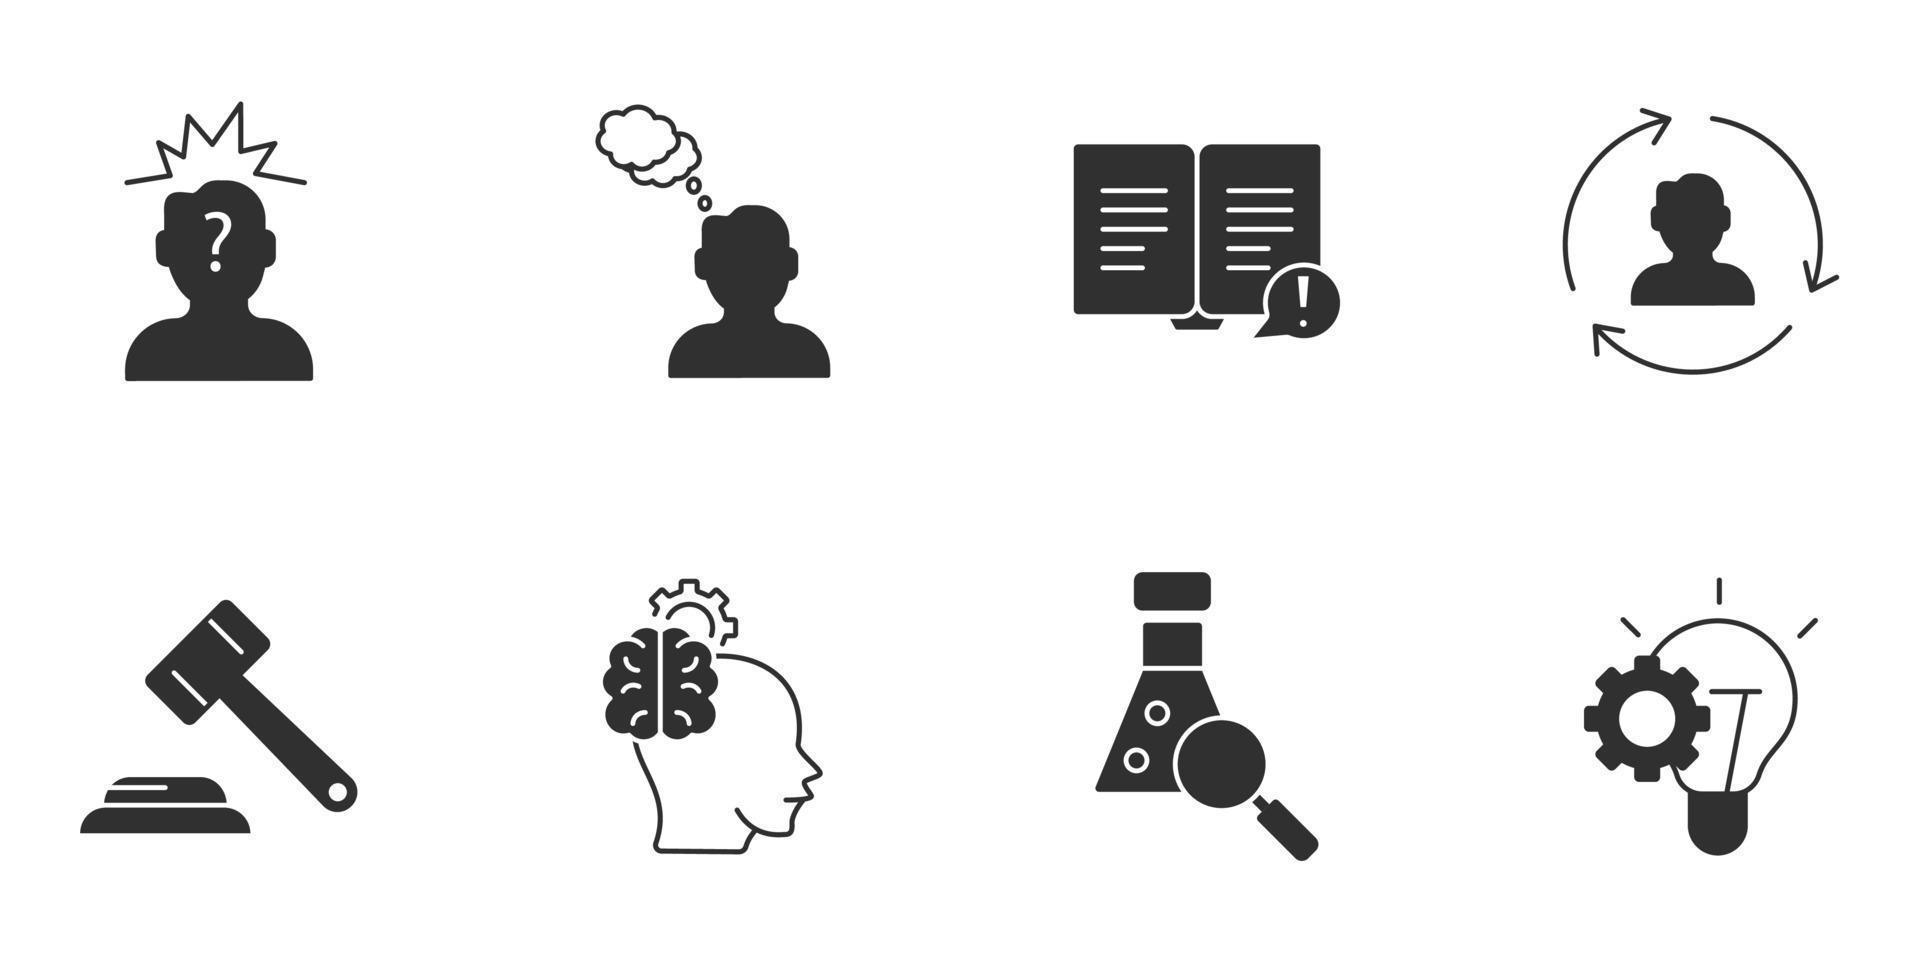 Critical thinking icons set . Critical thinking pack symbol vector elements for infographic web